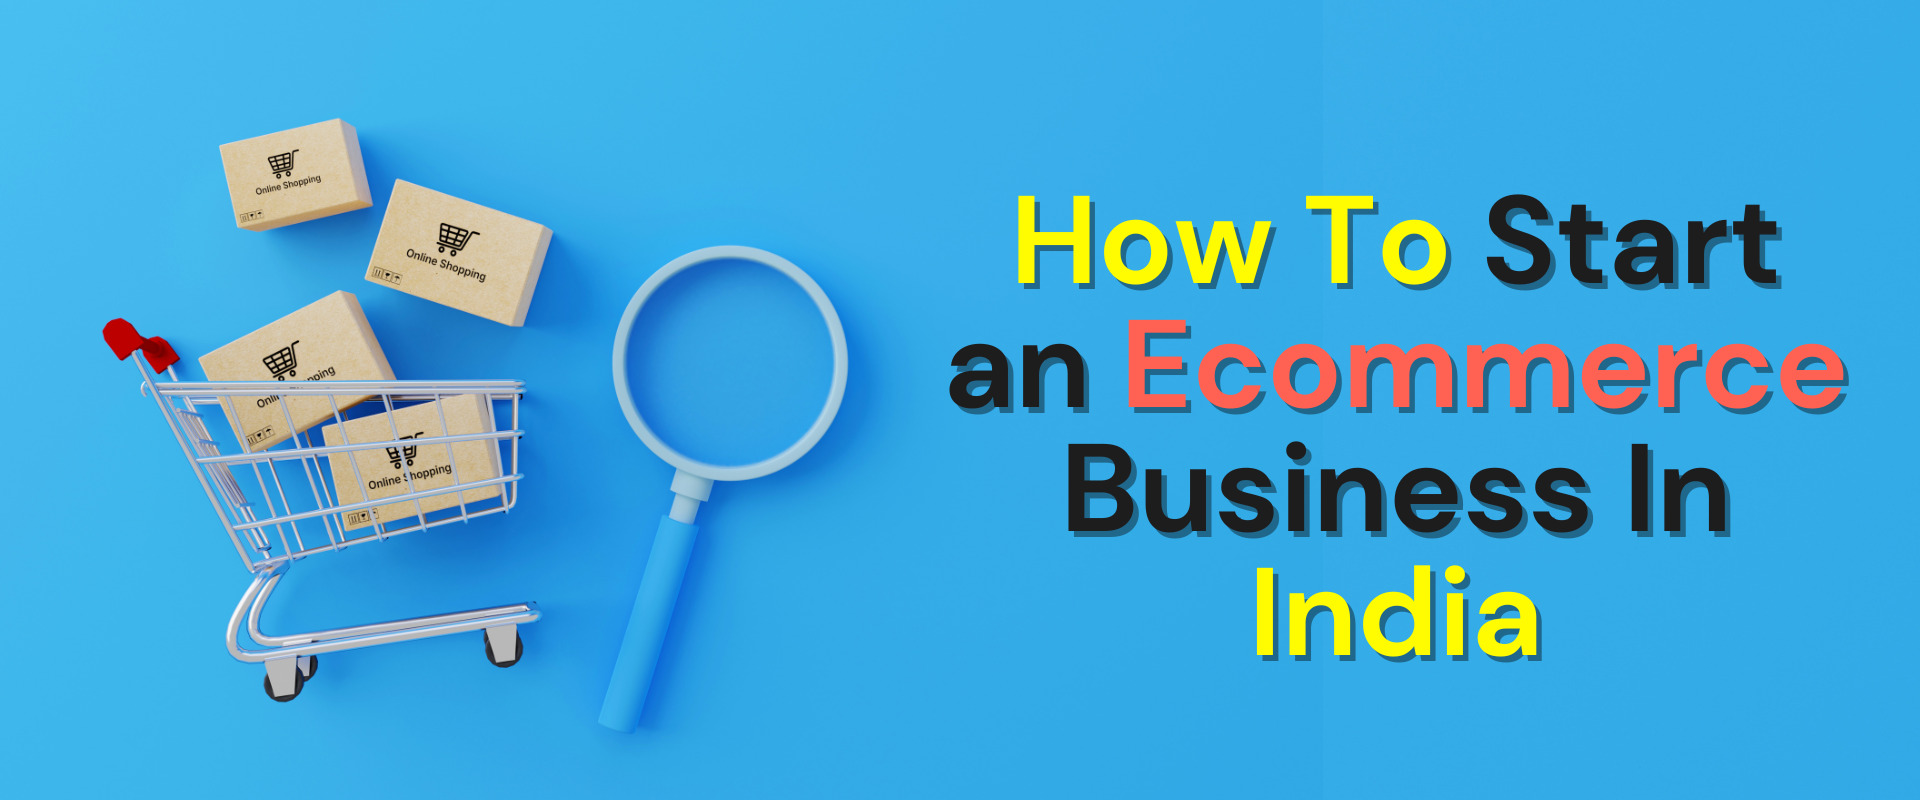 How To Start an Ecommerce Business In India